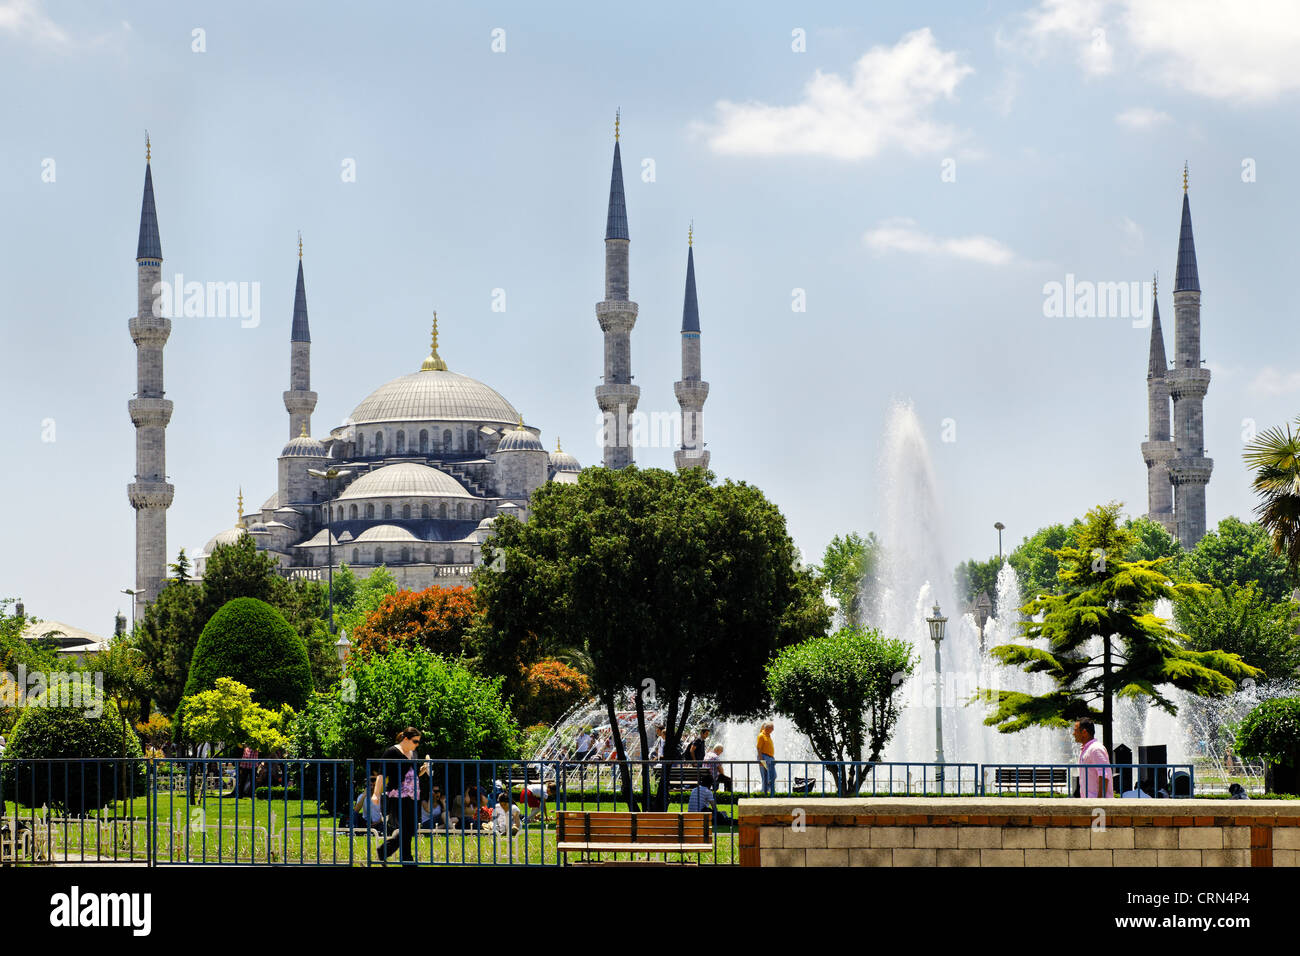 Landscape of the gardens, fountains and park lands of the Blue Mosque at Istanbul, Turkey Stock Photo